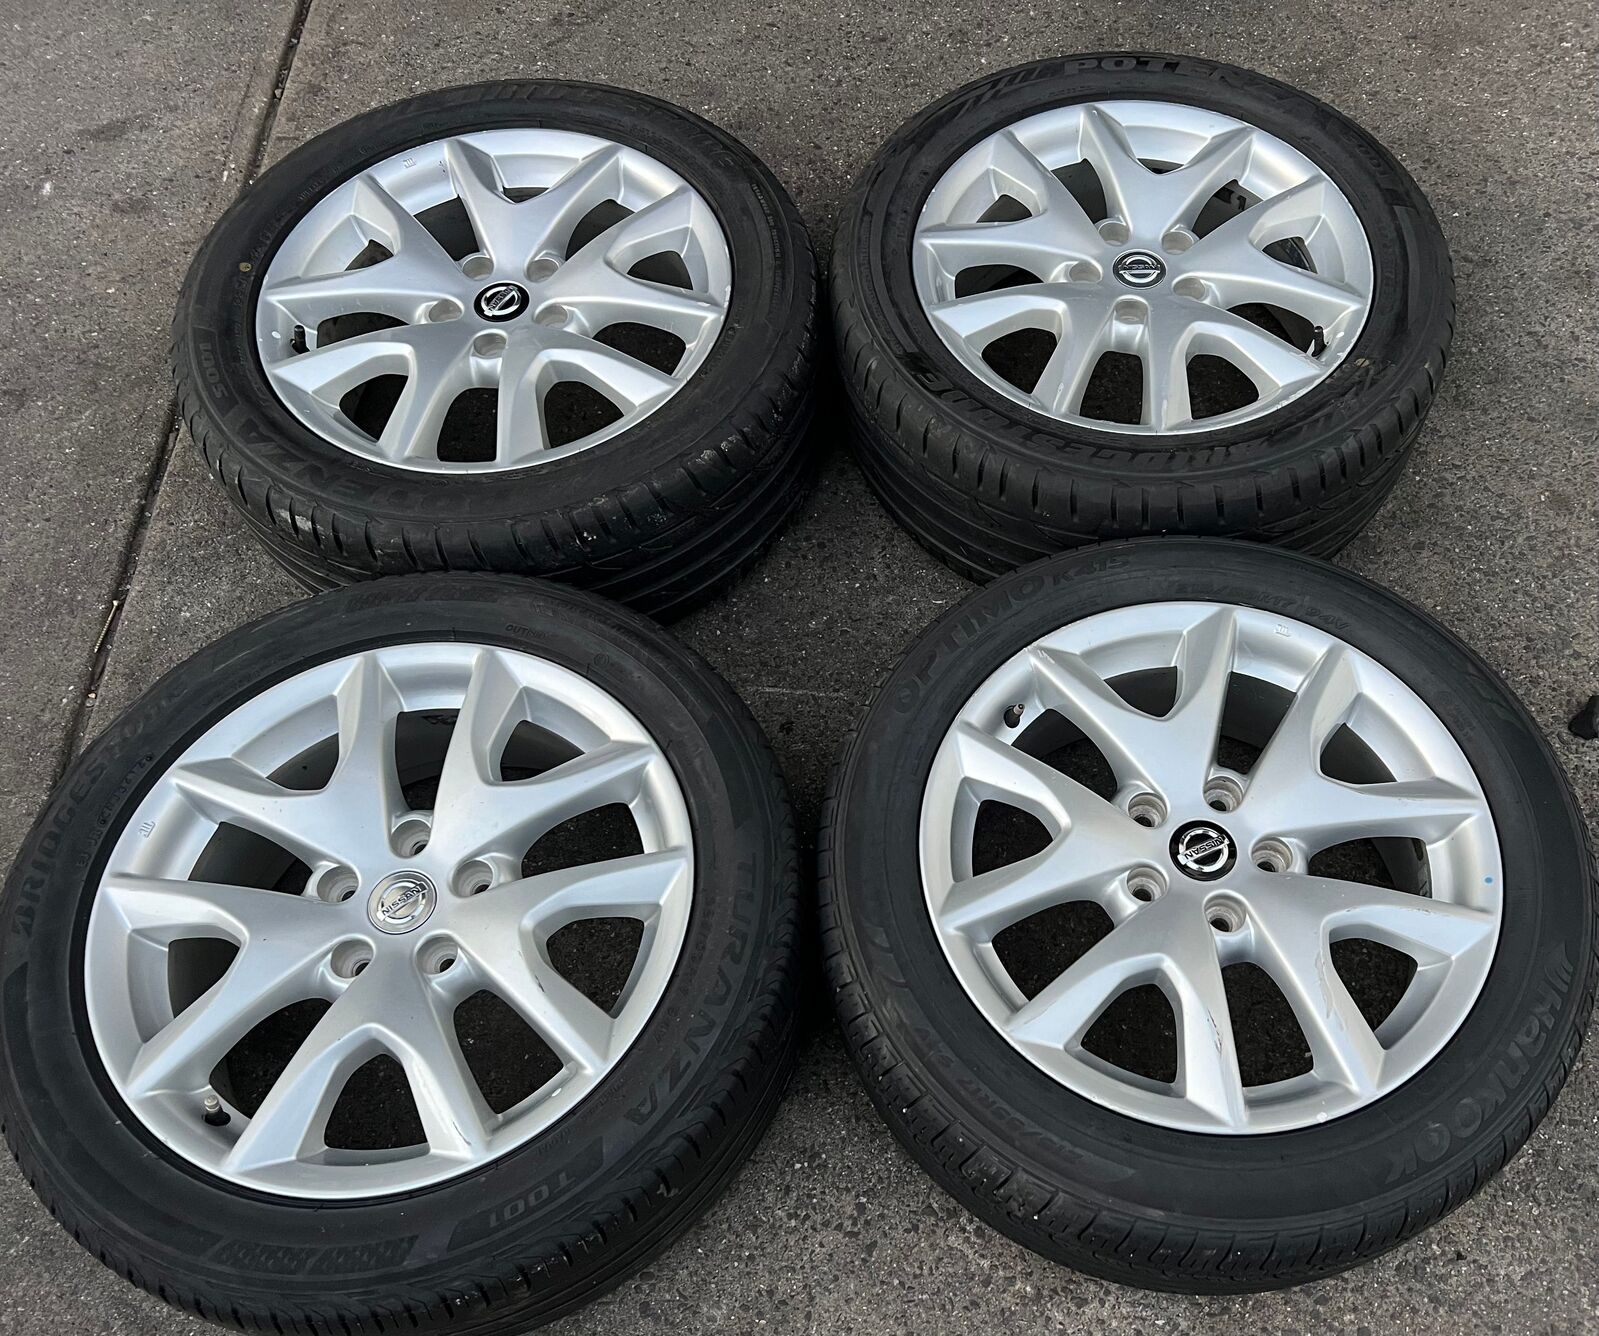 Set of Alloy Wheels to suit NISSAN MAXIMA 2005 ~ 2014